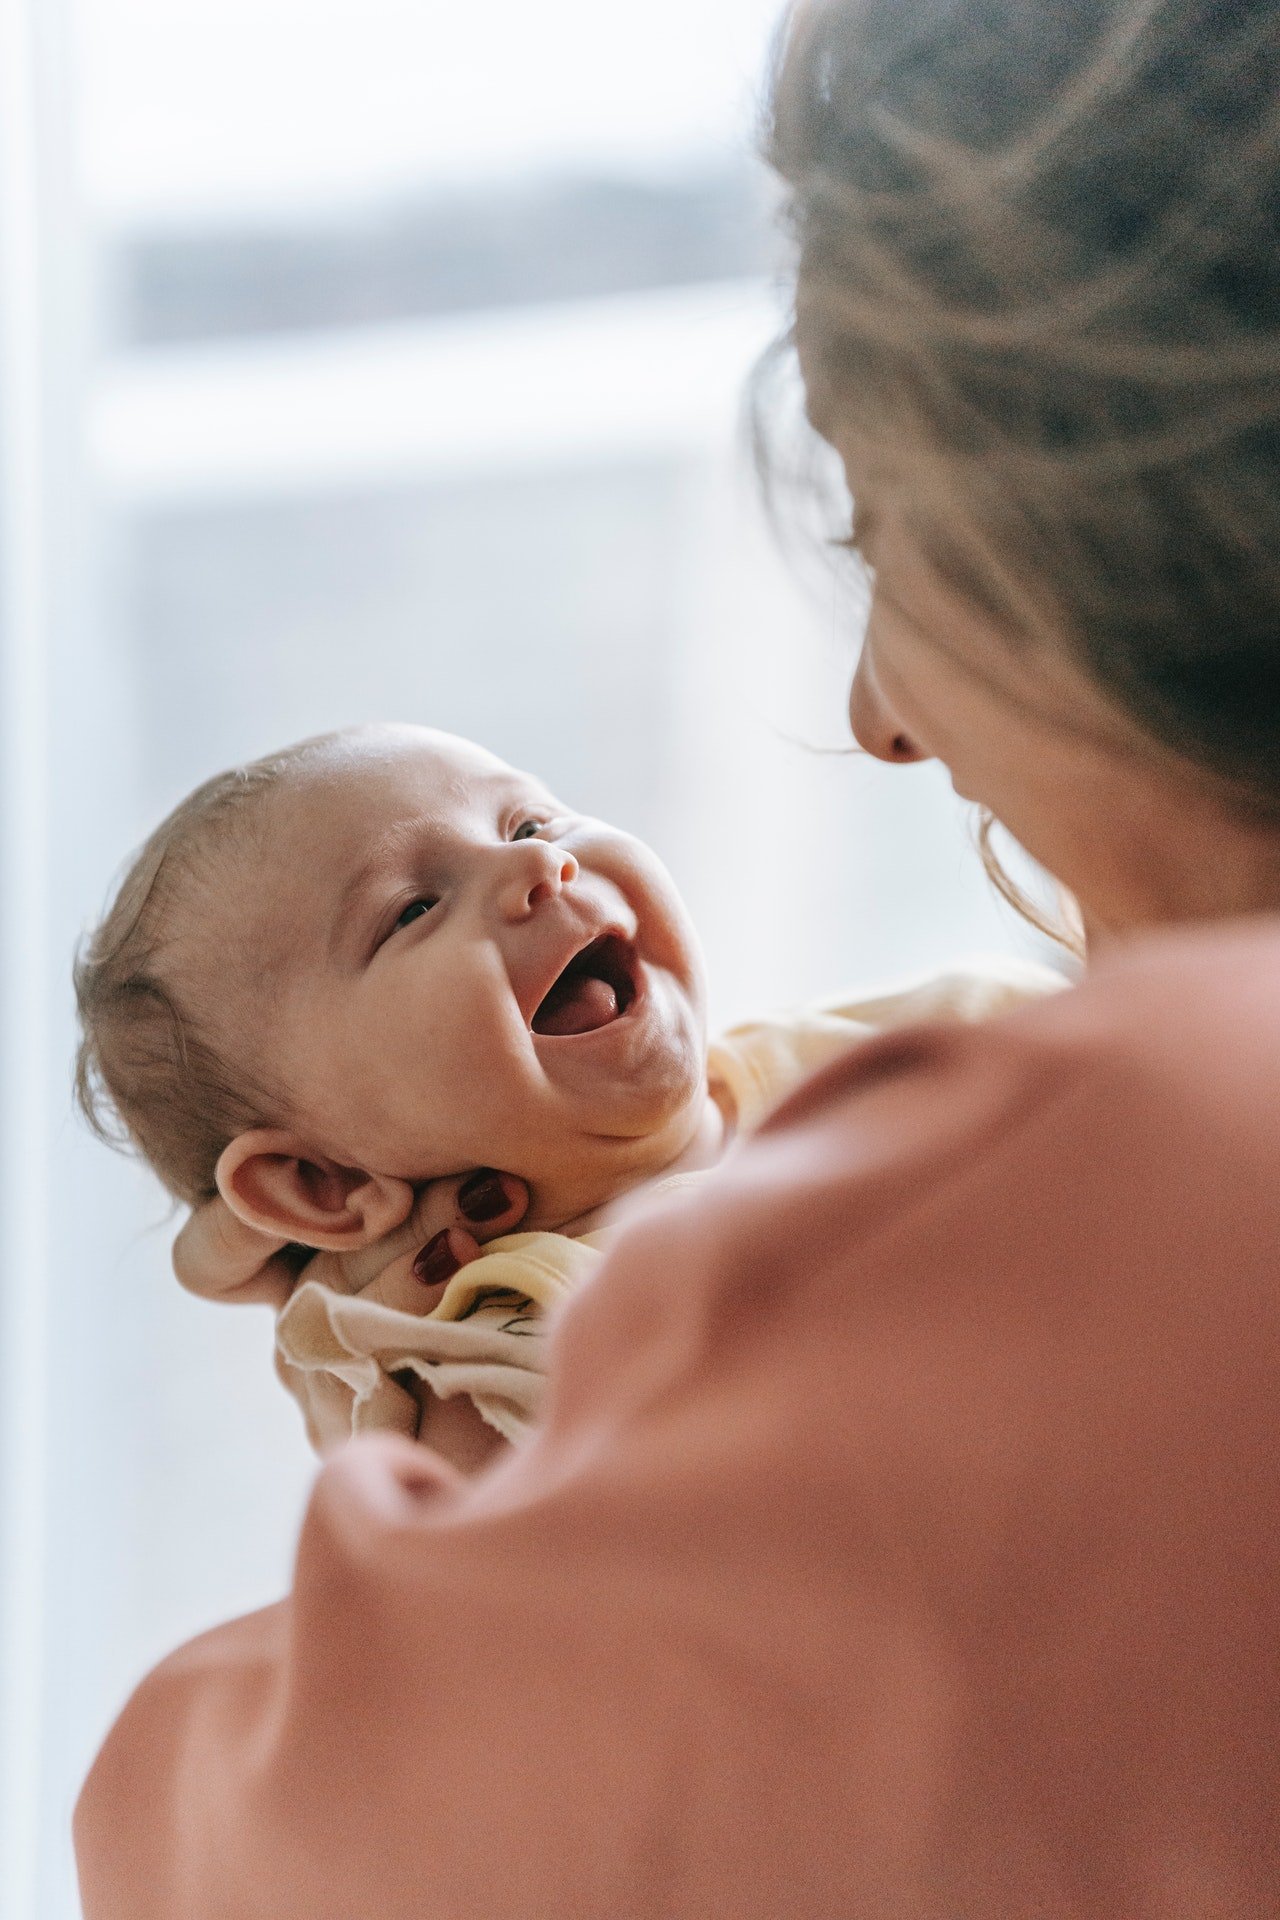 Everything changed when I saw my son's face. | Source: Pexels